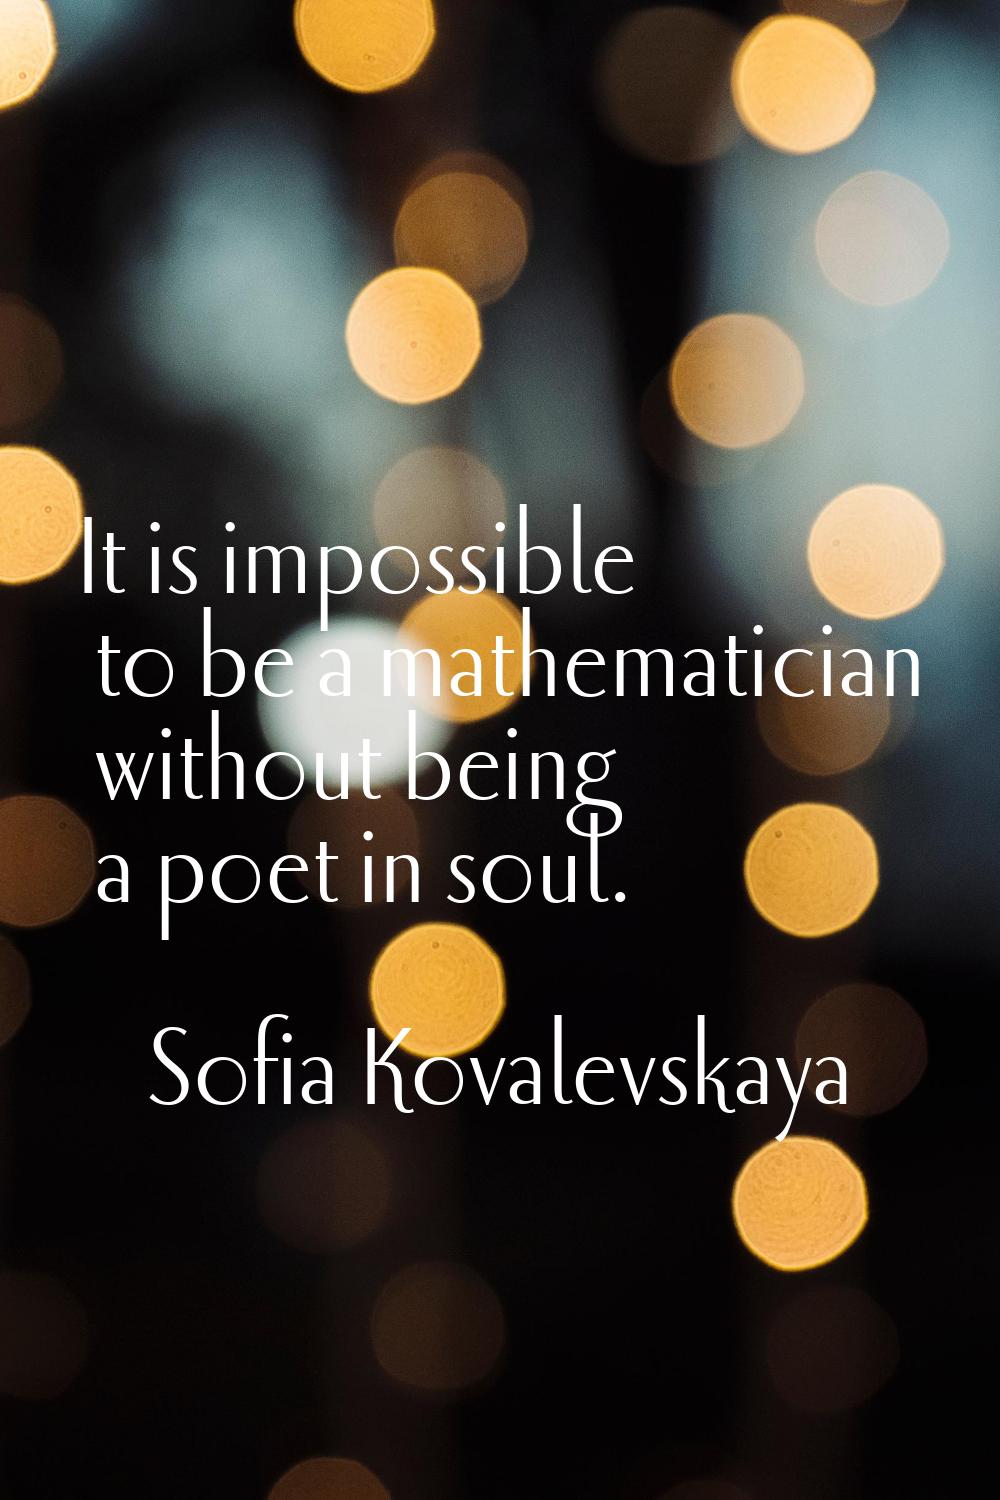 It is impossible to be a mathematician without being a poet in soul.